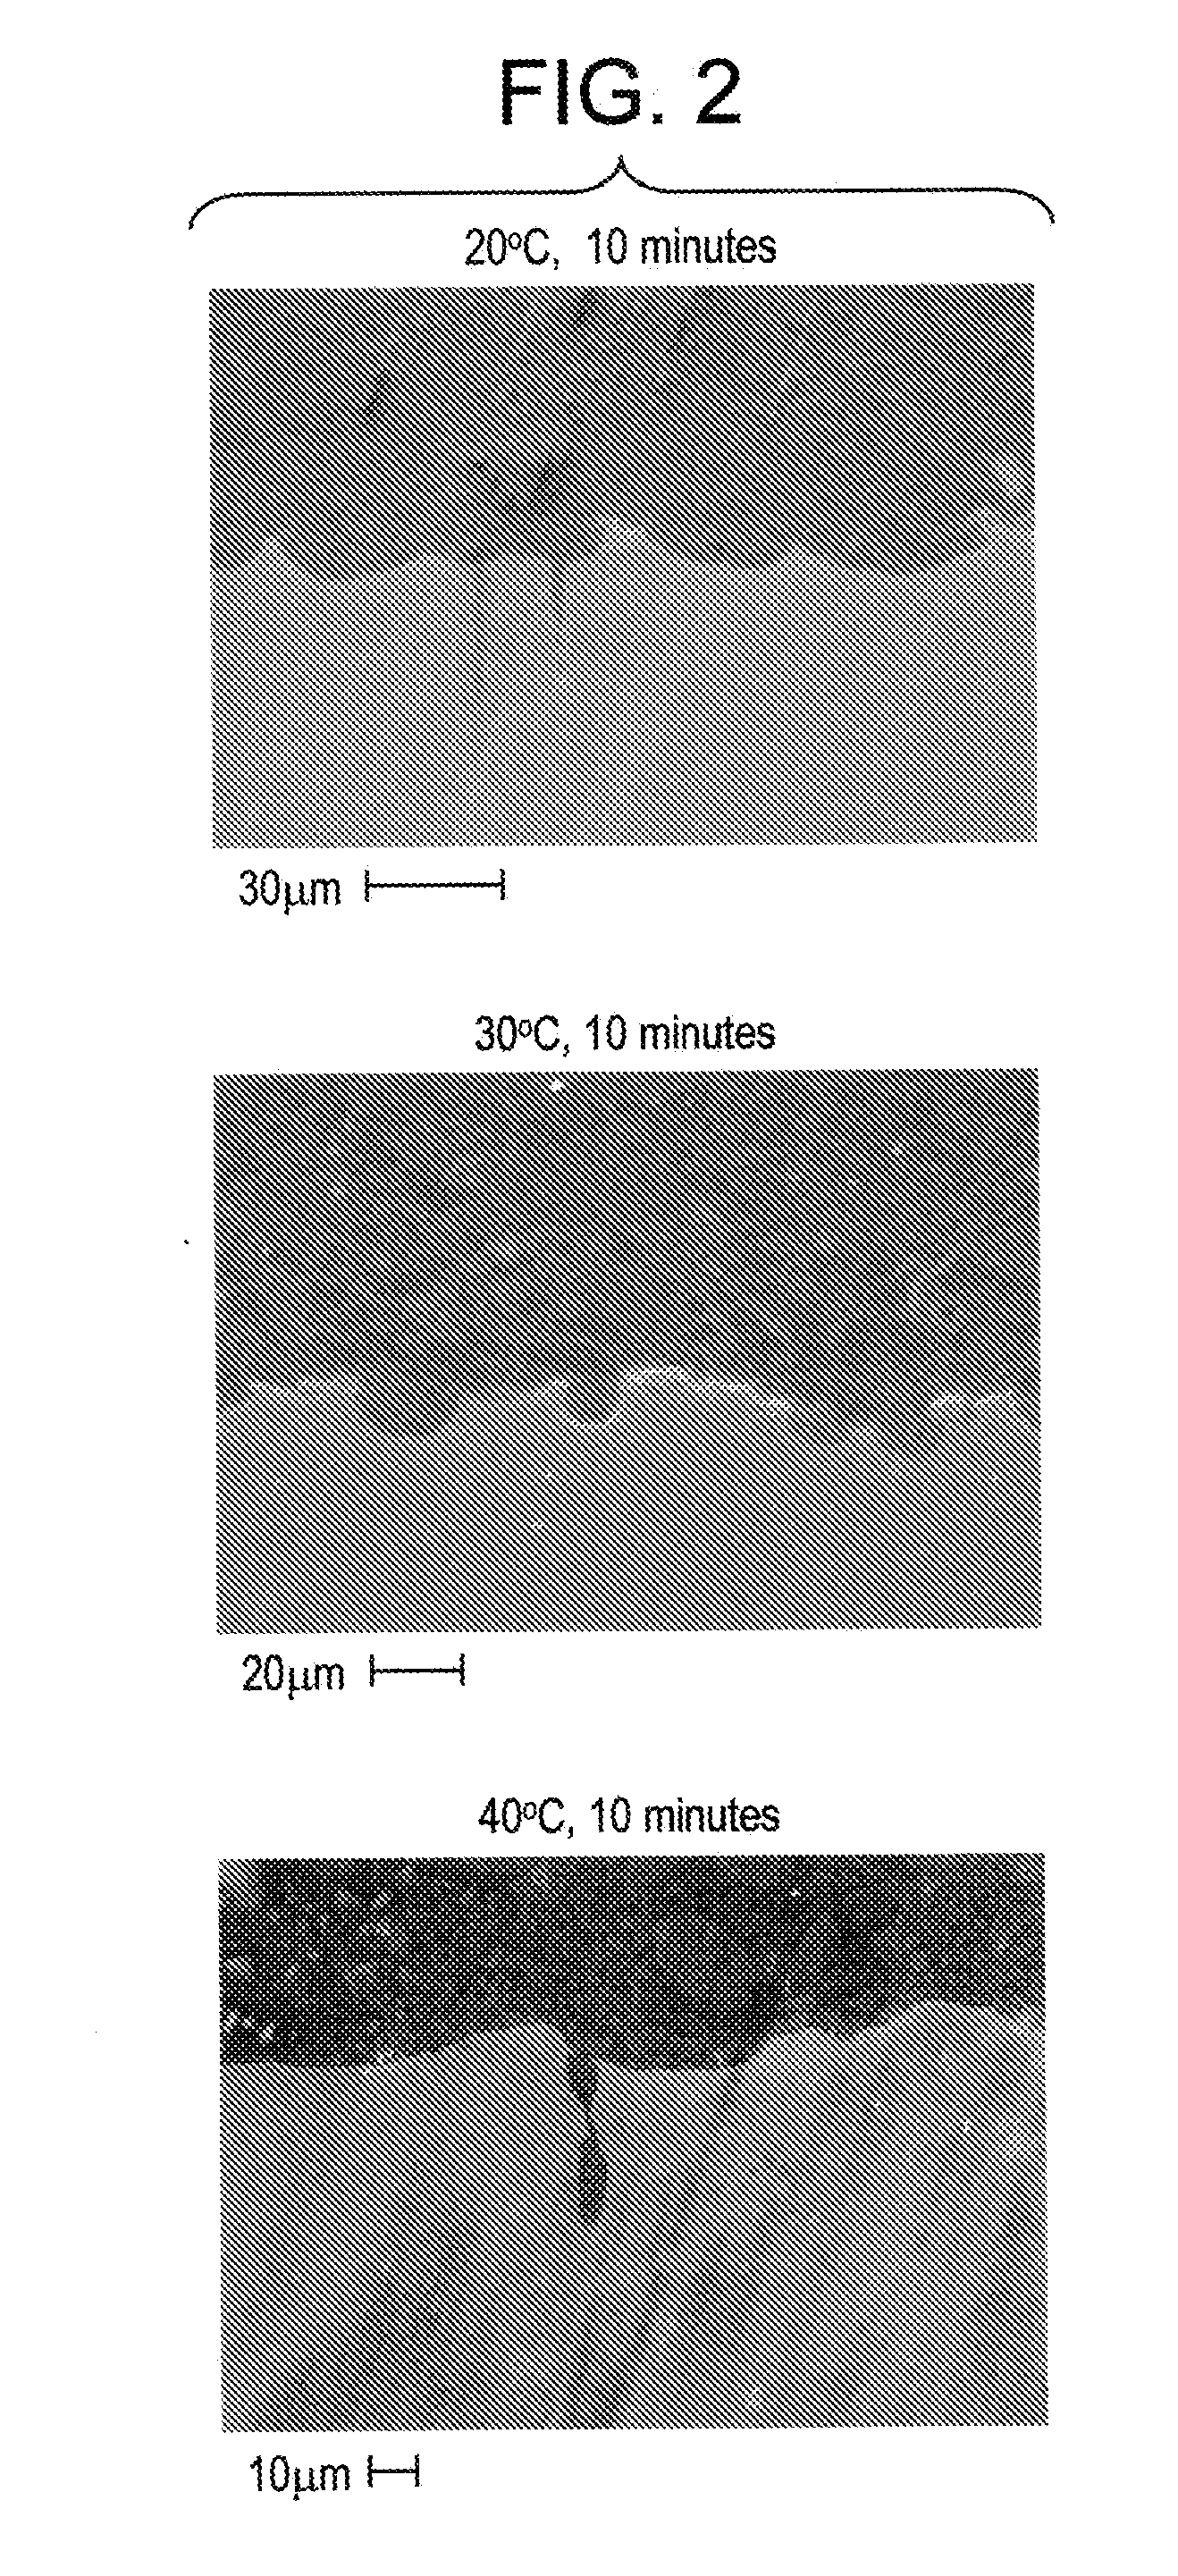 Processes for texturing a surface prior to electroless plating